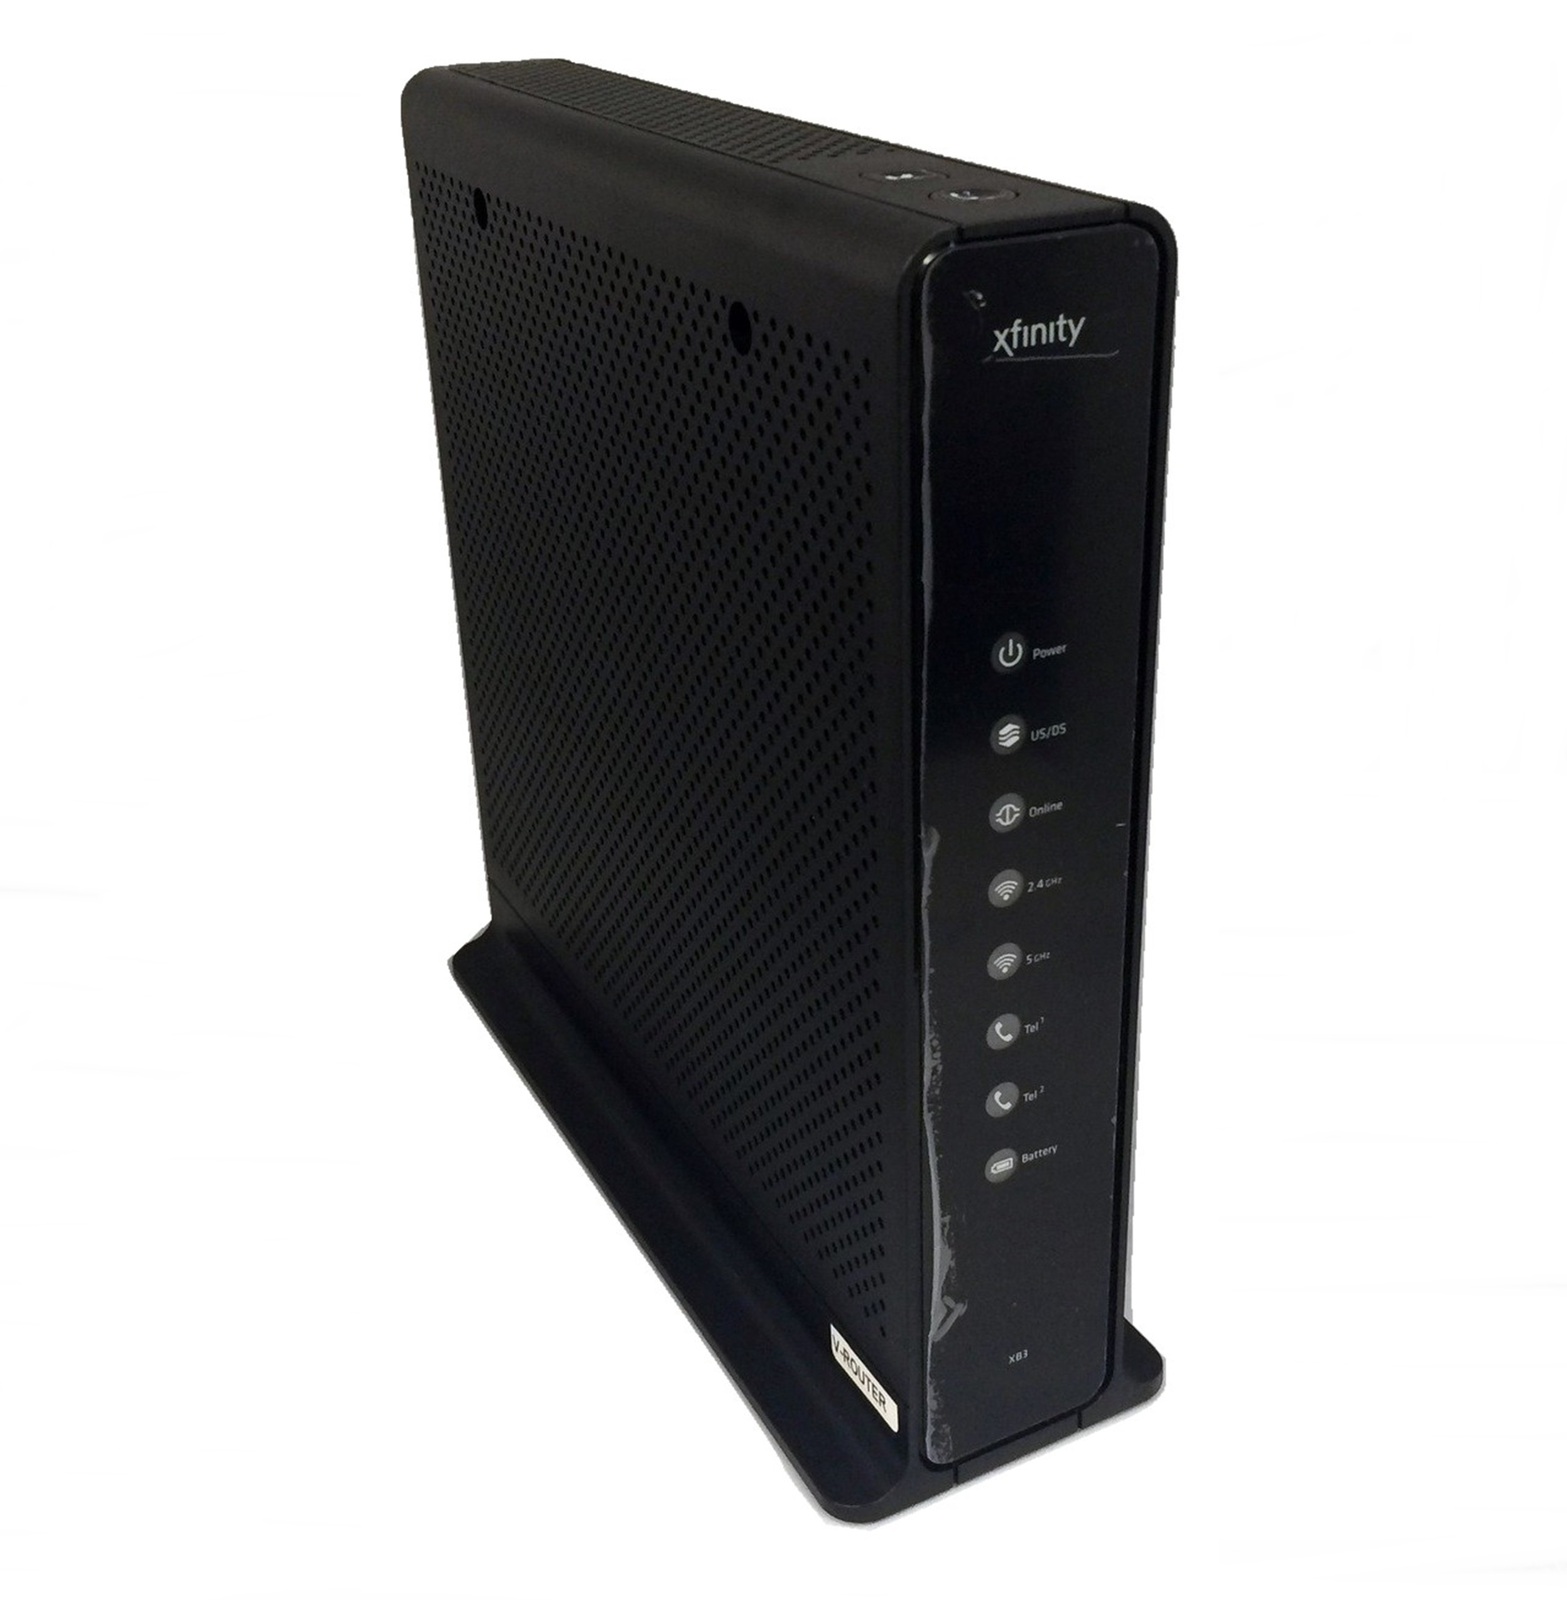 Ubee Cable Modem Manual